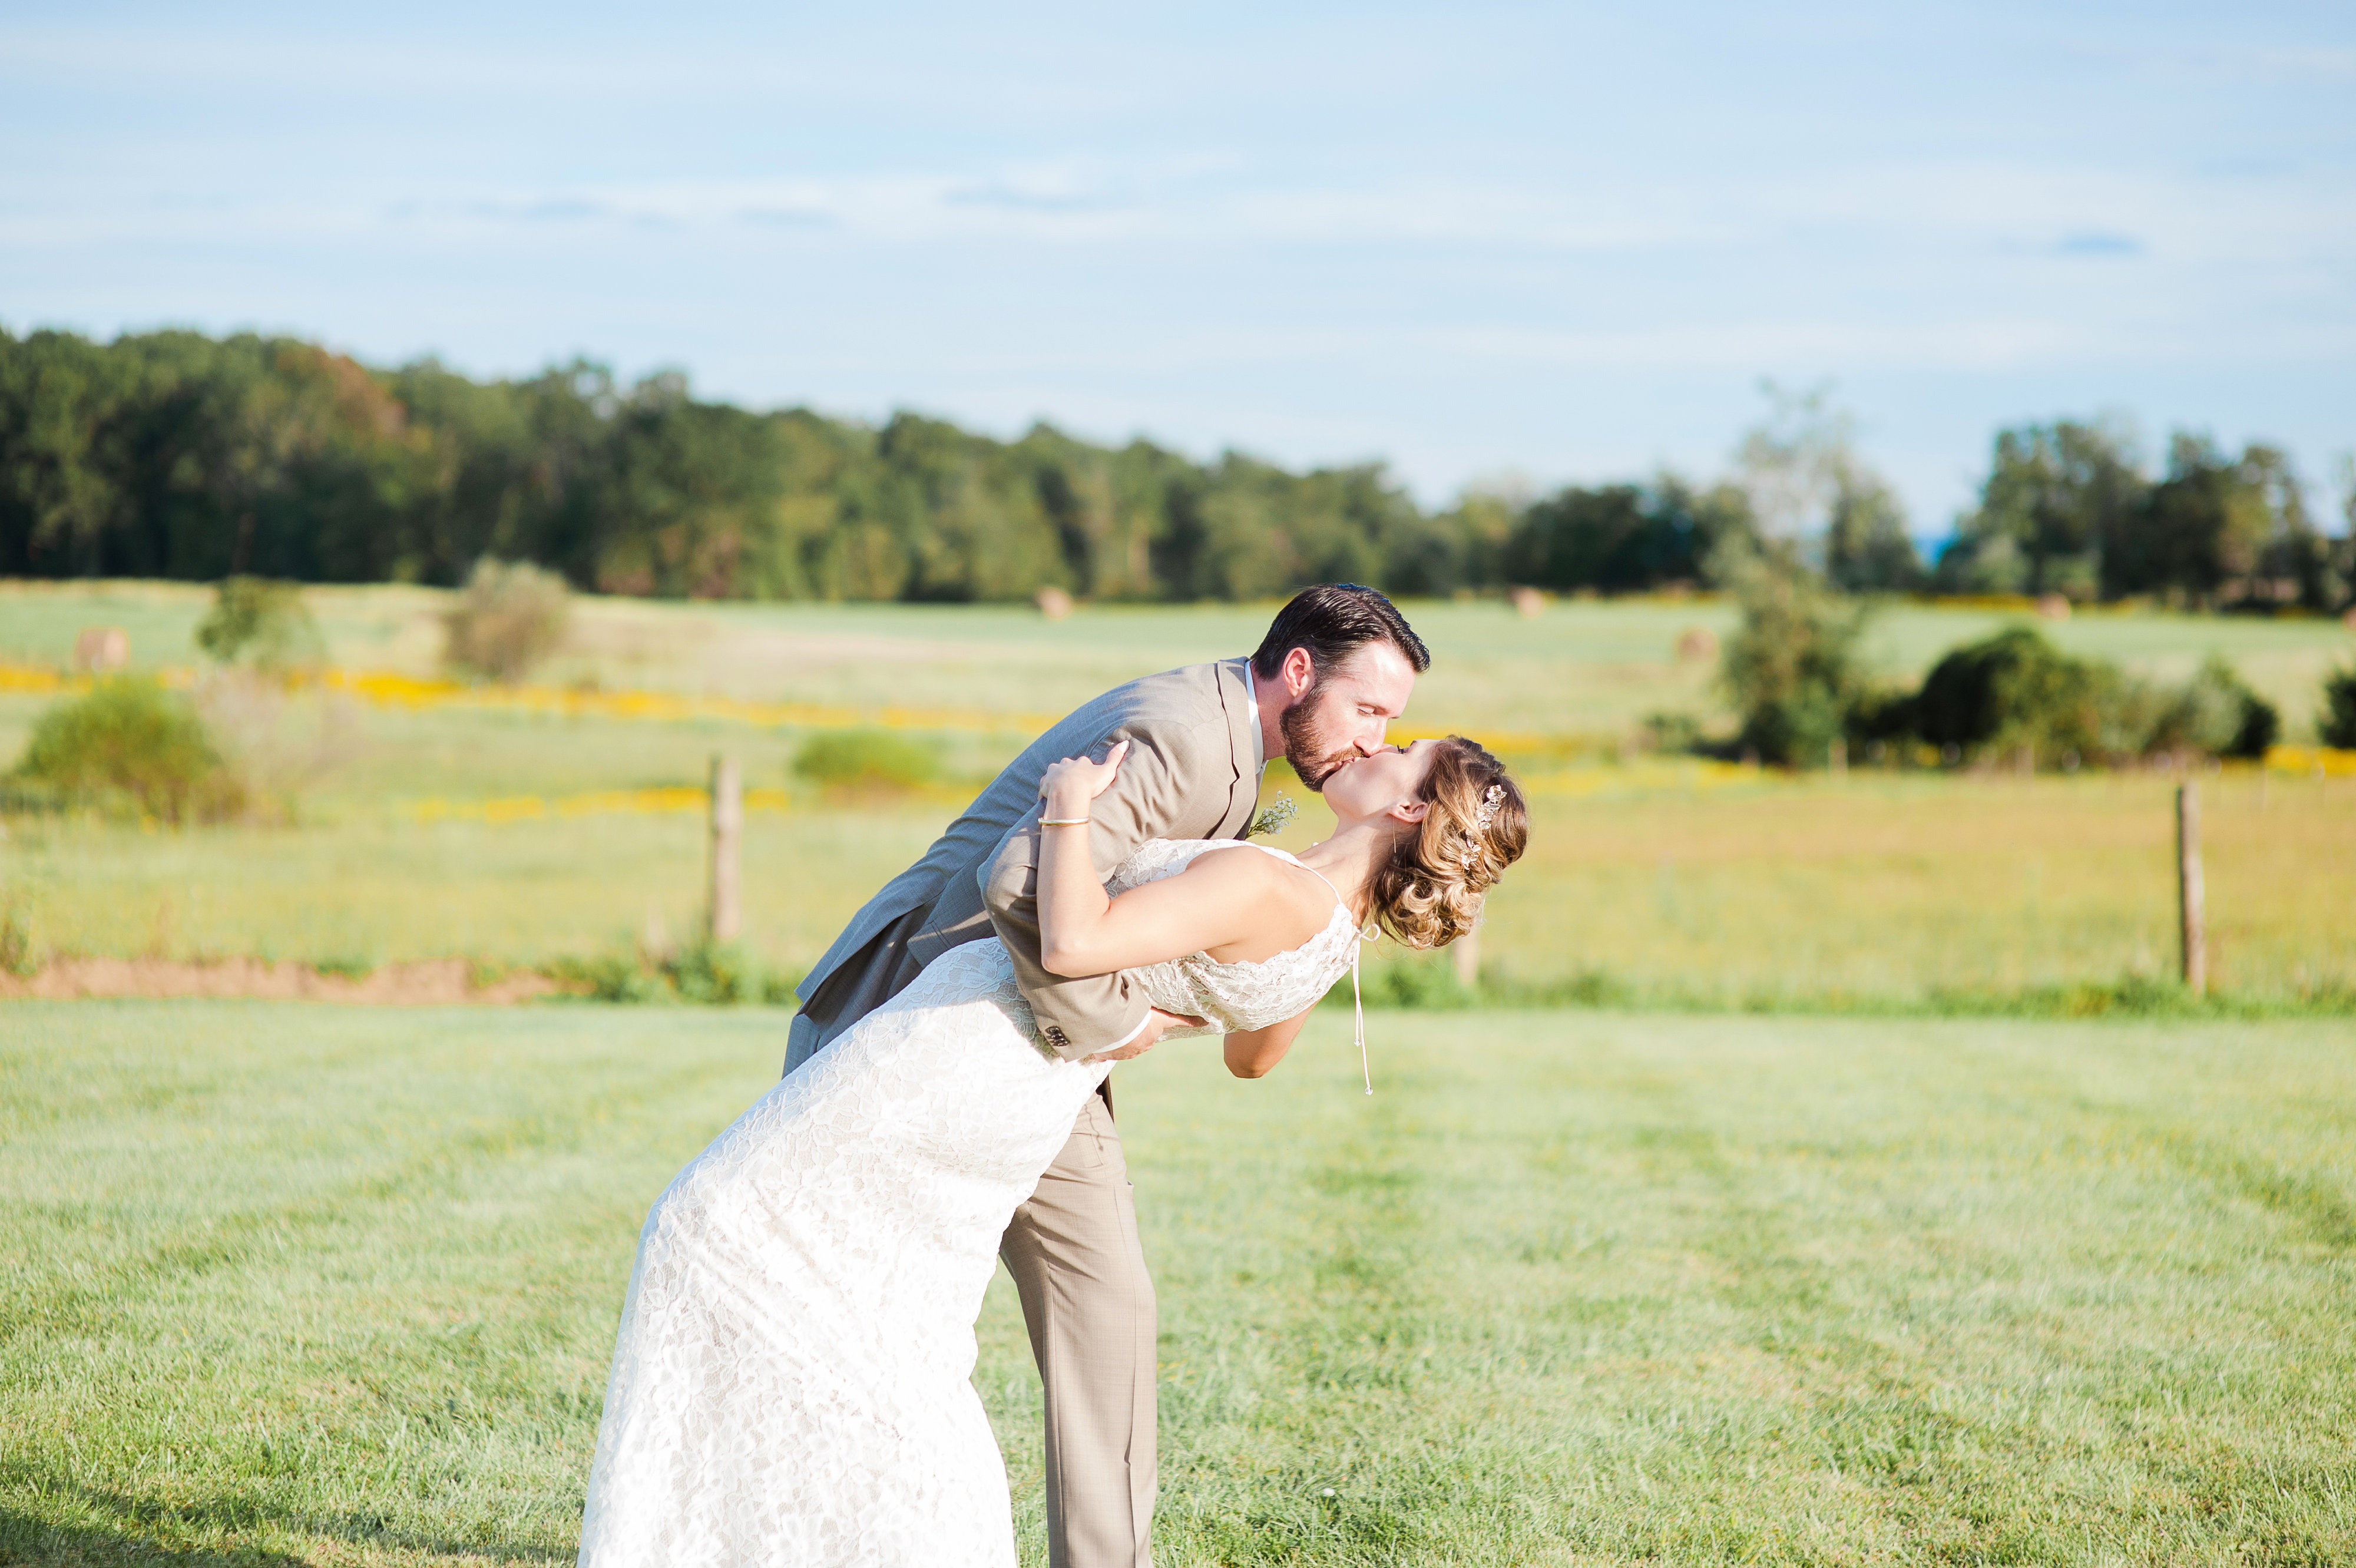 Why Loudoun County Is the Perfect Place to Say “I Do”